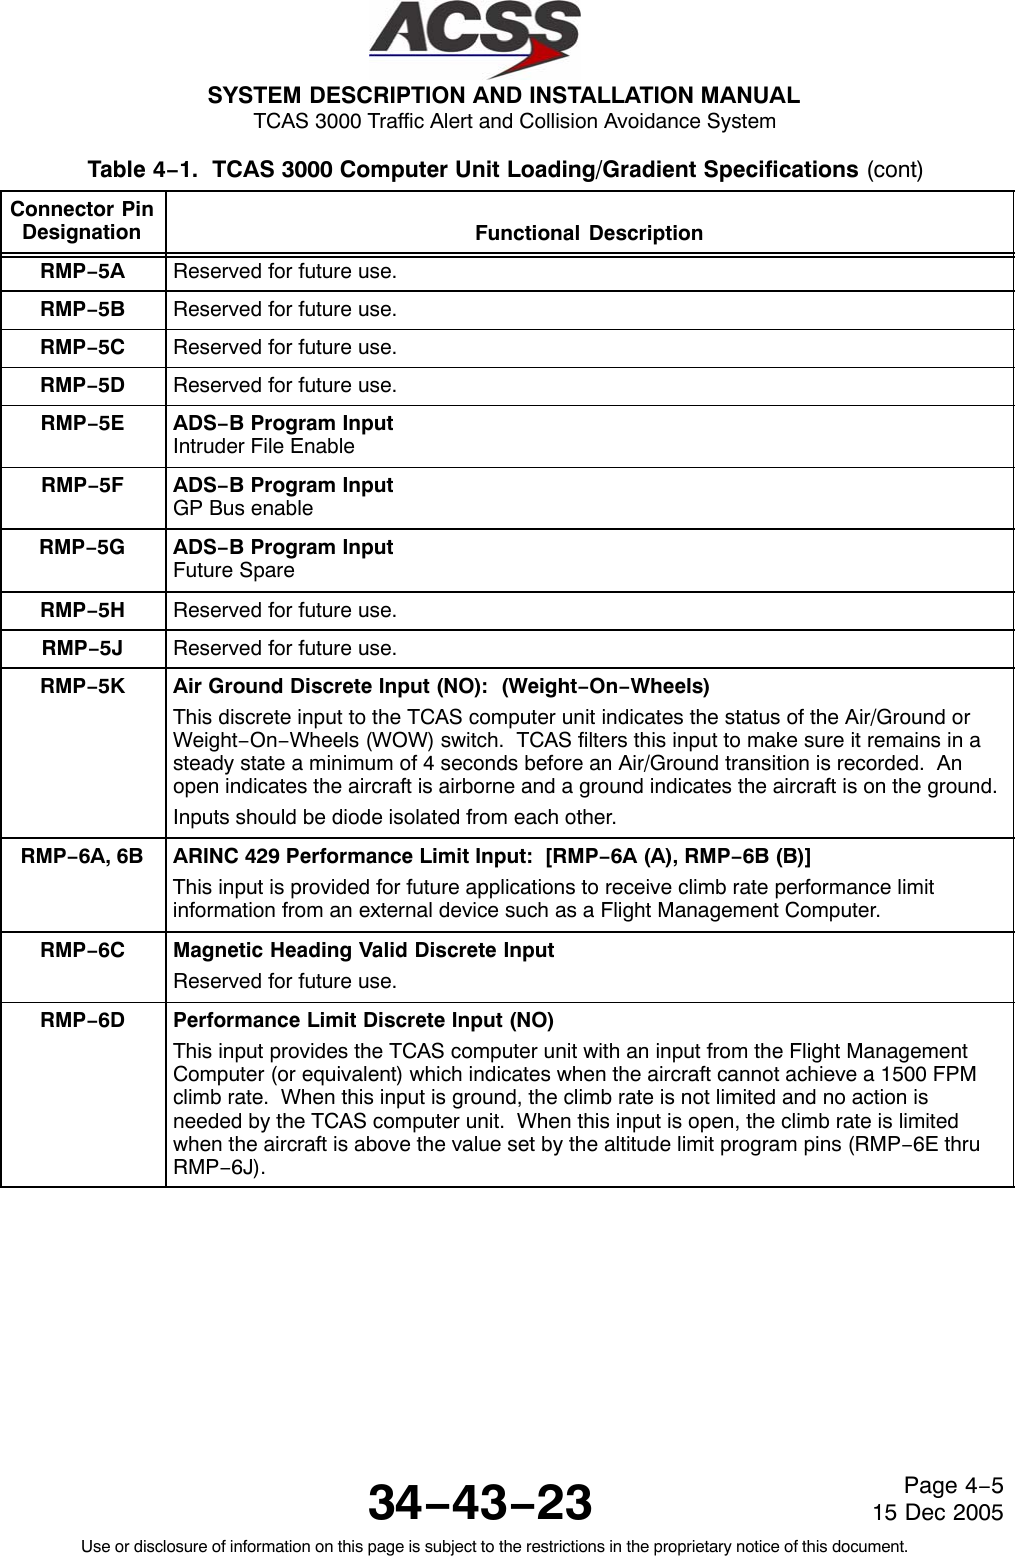 SYSTEM DESCRIPTION AND INSTALLATION MANUAL TCAS 3000 Traffic Alert and Collision Avoidance System34−43−23Use or disclosure of information on this page is subject to the restrictions in the proprietary notice of this document.Page 4−515 Dec 2005Table 4−1.  TCAS 3000 Computer Unit Loading/Gradient Specifications (cont)Connector PinDesignation Functional DescriptionRMP−5A Reserved for future use.RMP−5B Reserved for future use.RMP−5C Reserved for future use.RMP−5D Reserved for future use.RMP−5E ADS−B Program InputIntruder File EnableRMP−5F ADS−B Program InputGP Bus enableRMP−5G ADS−B Program InputFuture SpareRMP−5H Reserved for future use.RMP−5J Reserved for future use.RMP−5K Air Ground Discrete Input (NO):  (Weight−On−Wheels)This discrete input to the TCAS computer unit indicates the status of the Air/Ground orWeight−On−Wheels (WOW) switch.  TCAS filters this input to make sure it remains in asteady state a minimum of 4 seconds before an Air/Ground transition is recorded.  Anopen indicates the aircraft is airborne and a ground indicates the aircraft is on the ground.Inputs should be diode isolated from each other.RMP−6A, 6B ARINC 429 Performance Limit Input:  [RMP−6A (A), RMP−6B (B)]This input is provided for future applications to receive climb rate performance limitinformation from an external device such as a Flight Management Computer.RMP−6C Magnetic Heading Valid Discrete InputReserved for future use.RMP−6D Performance Limit Discrete Input (NO)This input provides the TCAS computer unit with an input from the Flight ManagementComputer (or equivalent) which indicates when the aircraft cannot achieve a 1500 FPMclimb rate.  When this input is ground, the climb rate is not limited and no action isneeded by the TCAS computer unit.  When this input is open, the climb rate is limitedwhen the aircraft is above the value set by the altitude limit program pins (RMP−6E thruRMP−6J).